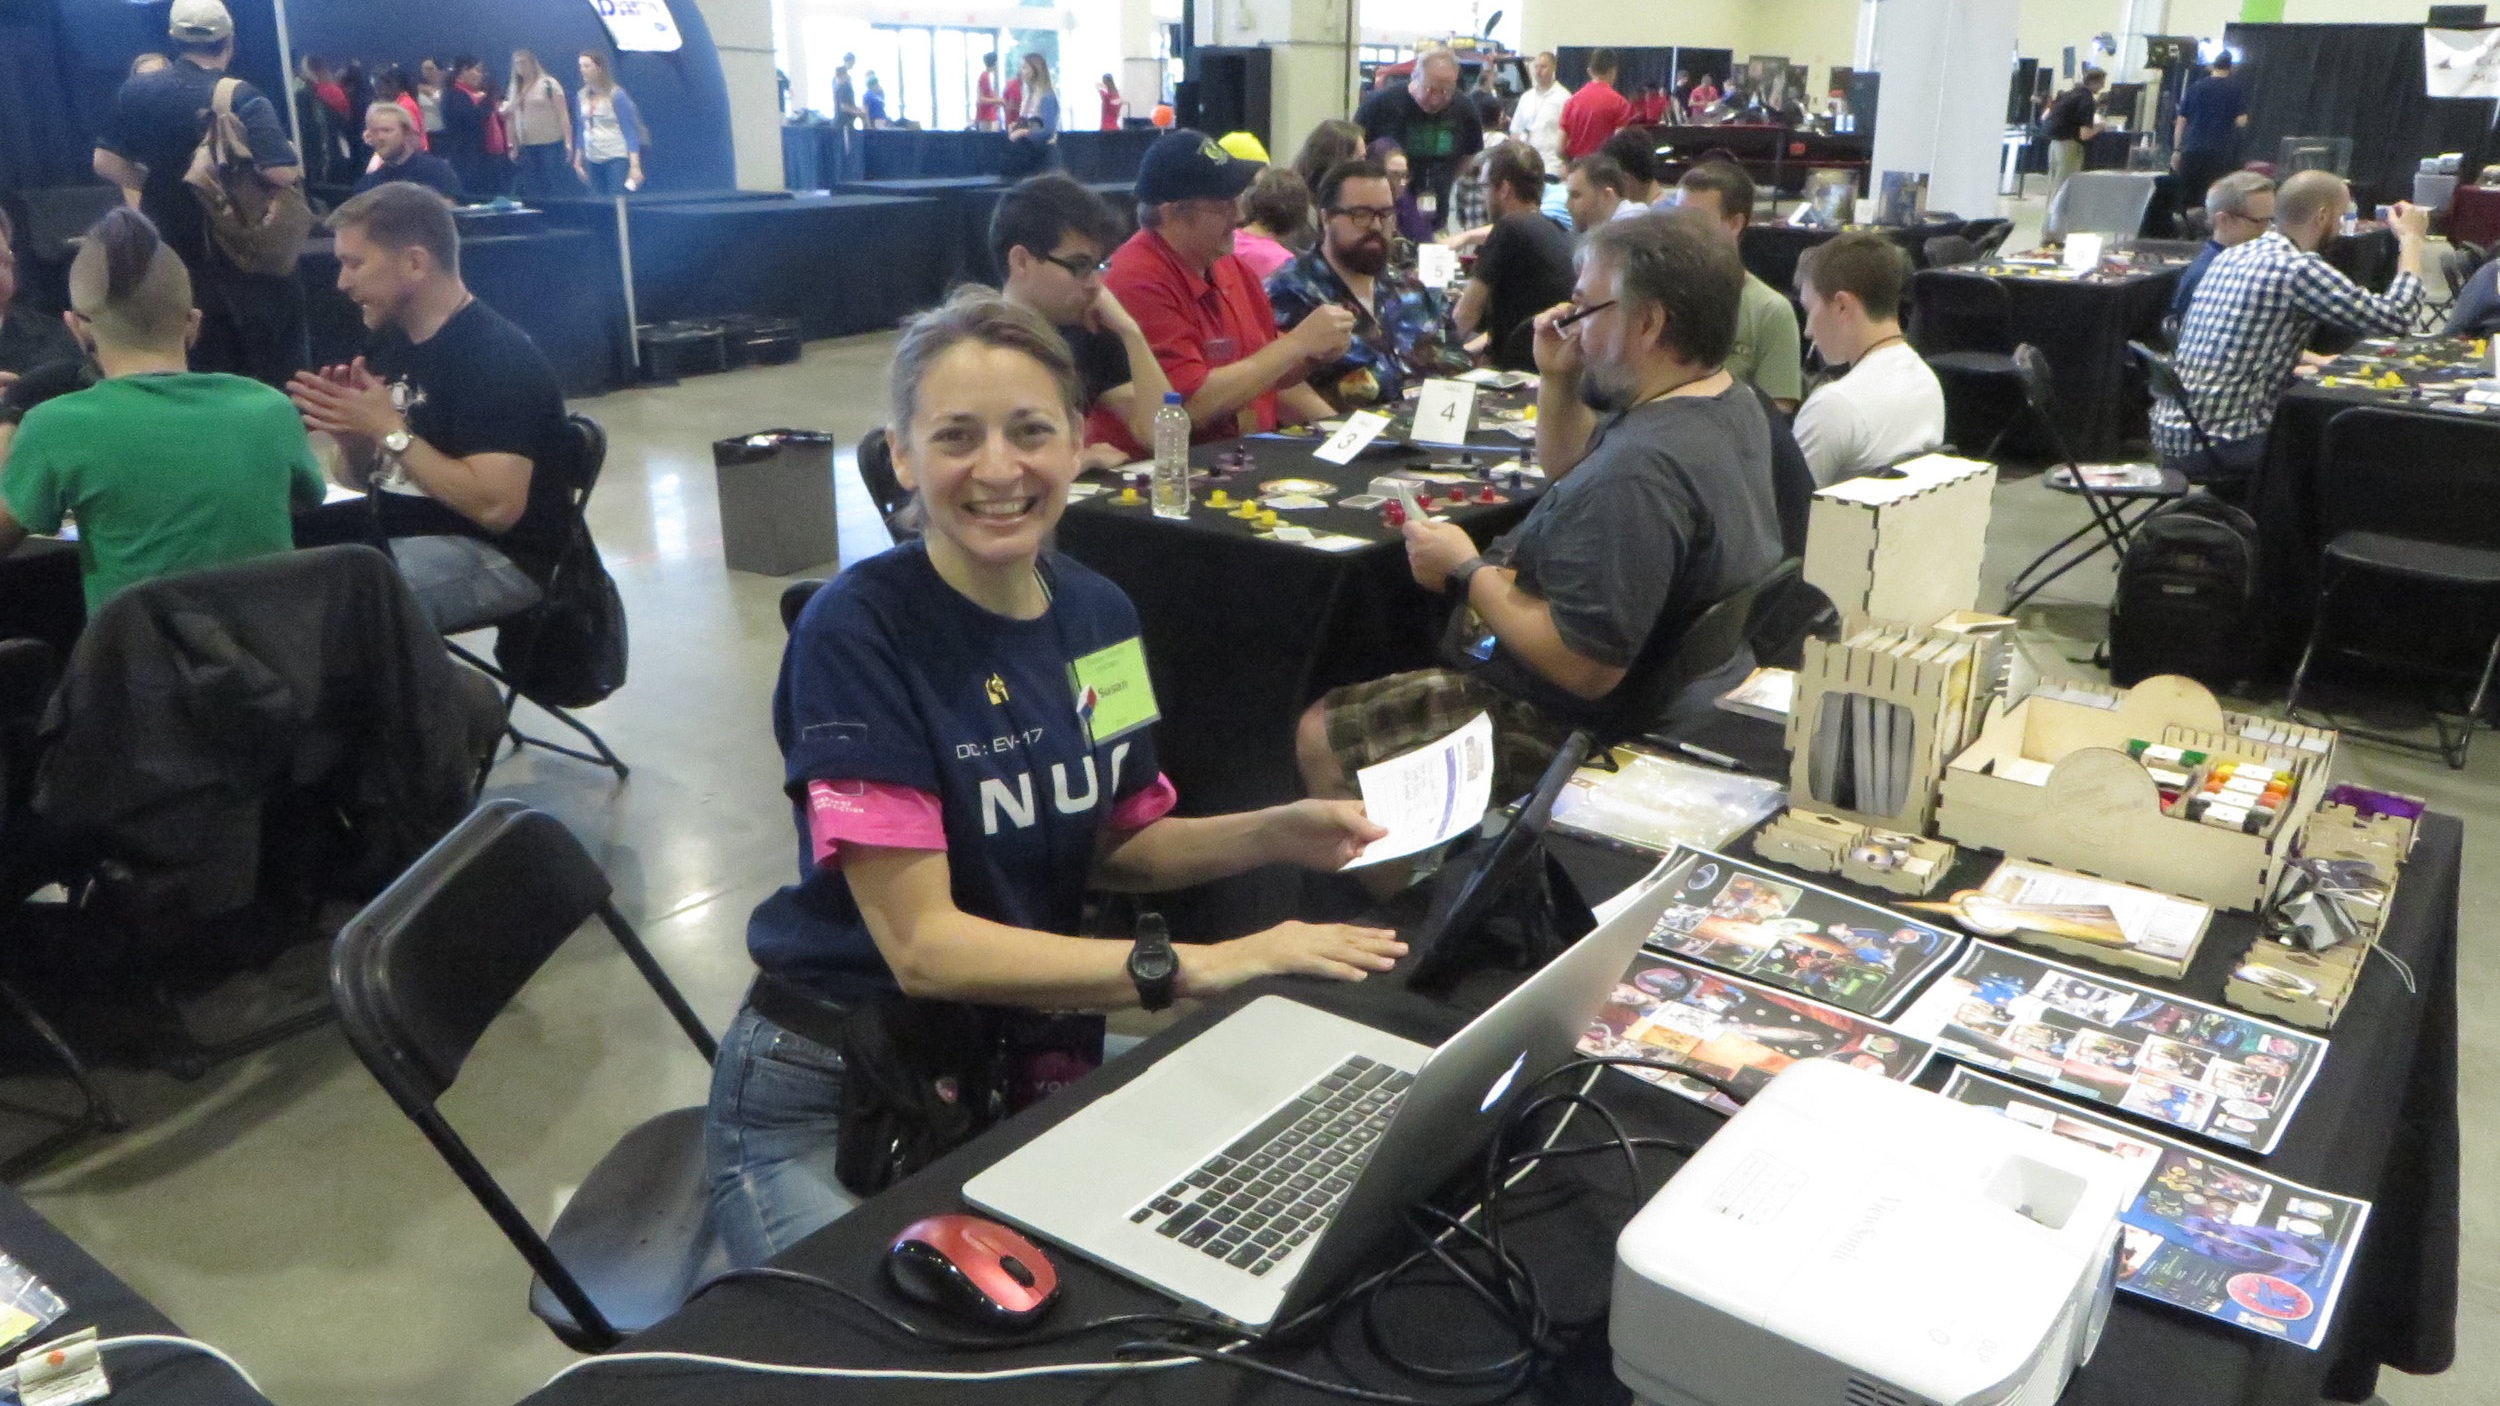  Susan Plano-Faber, Escape Velocity volunteer learned the tournament scoring system on the fly! 